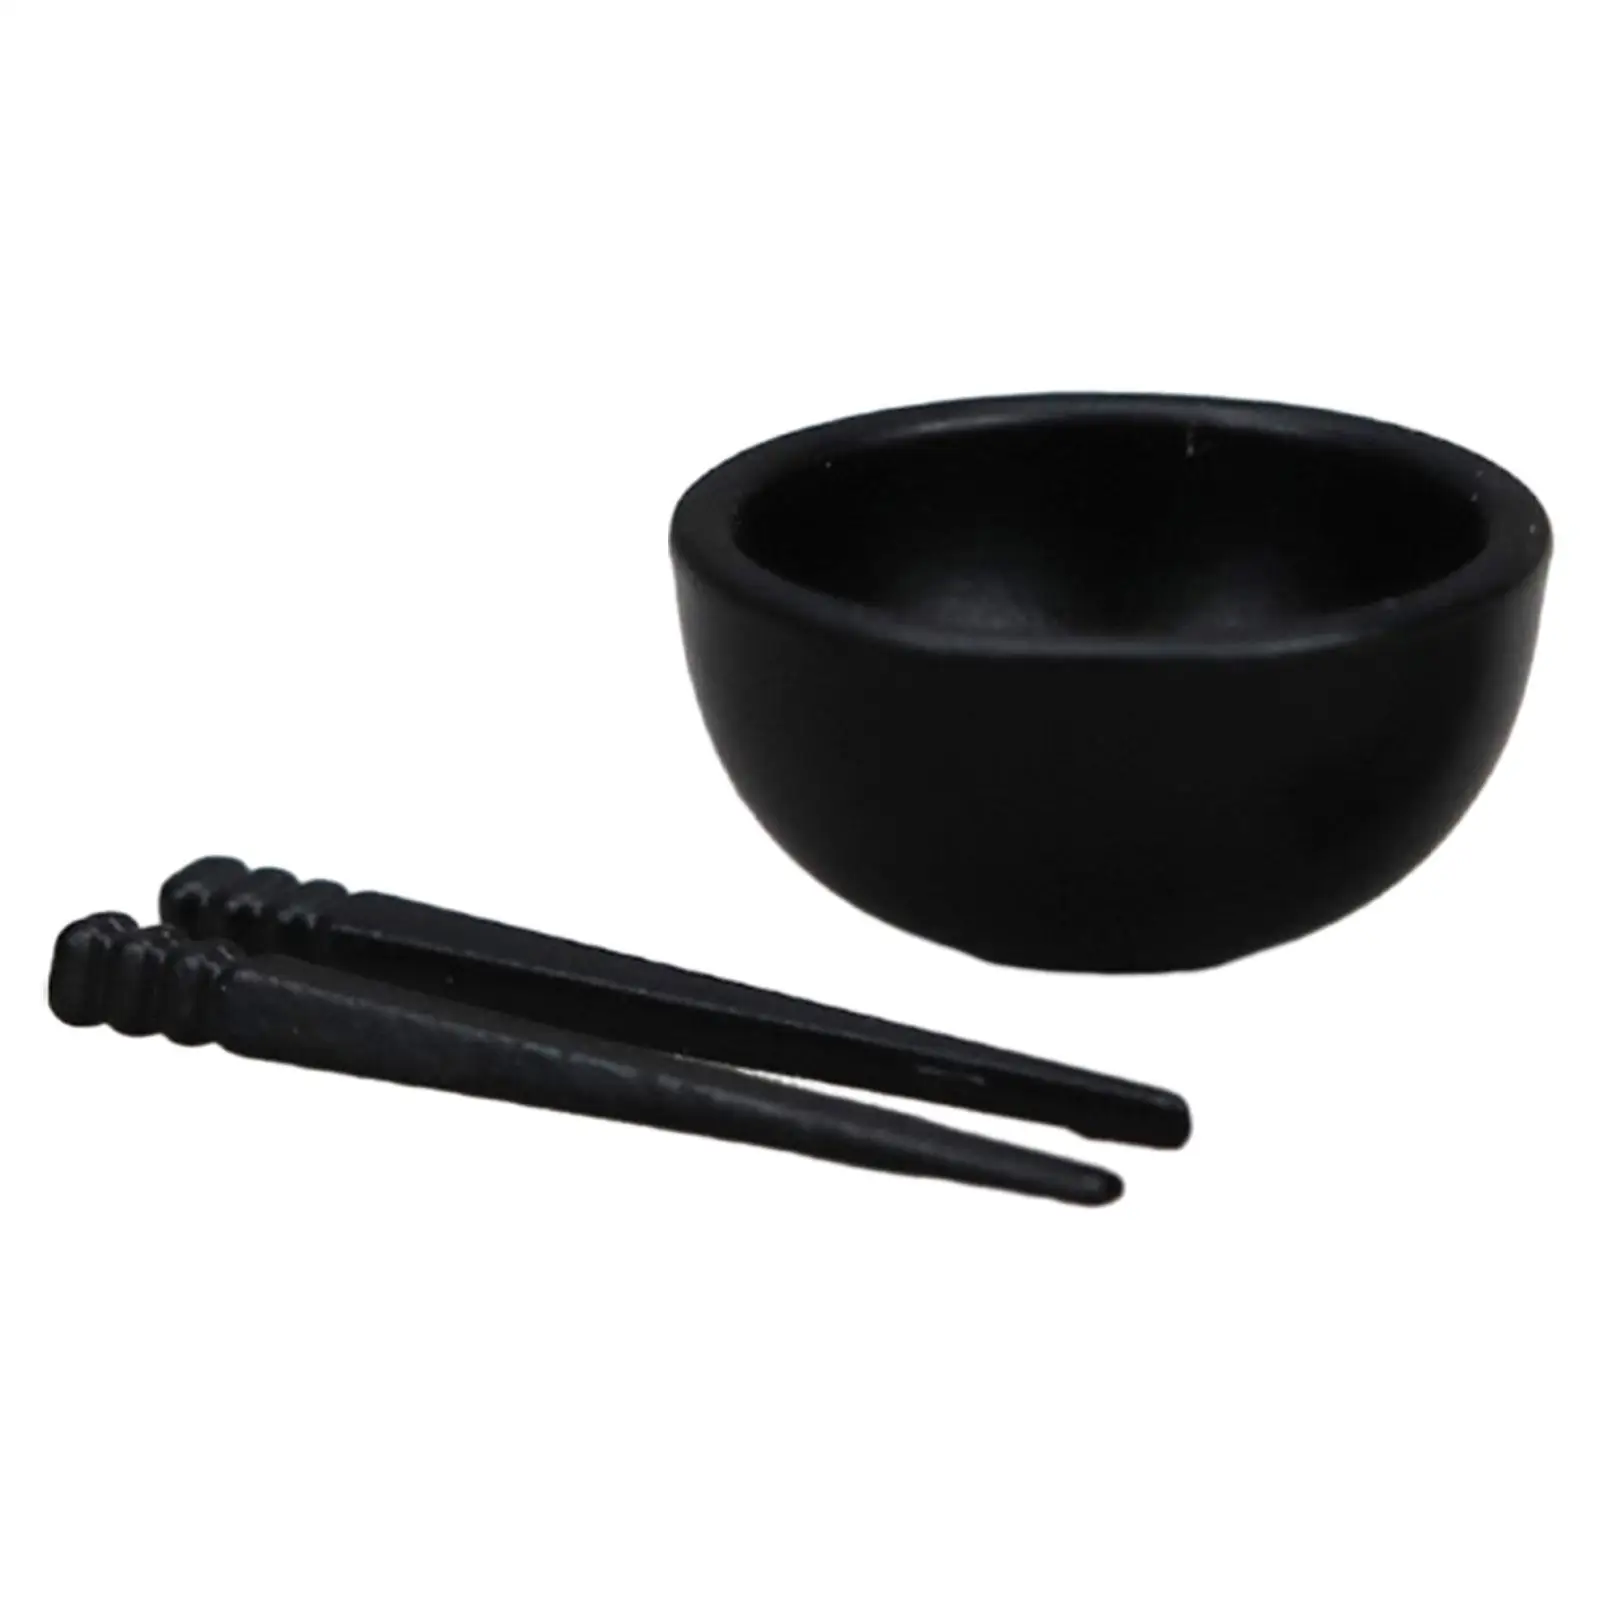 1/12 Dollhouse Bowl Chopsticks Dollhouse Furniture Accessories Miniature Kitchen Accessories for Boys Girls Kids Toddlers Gifts